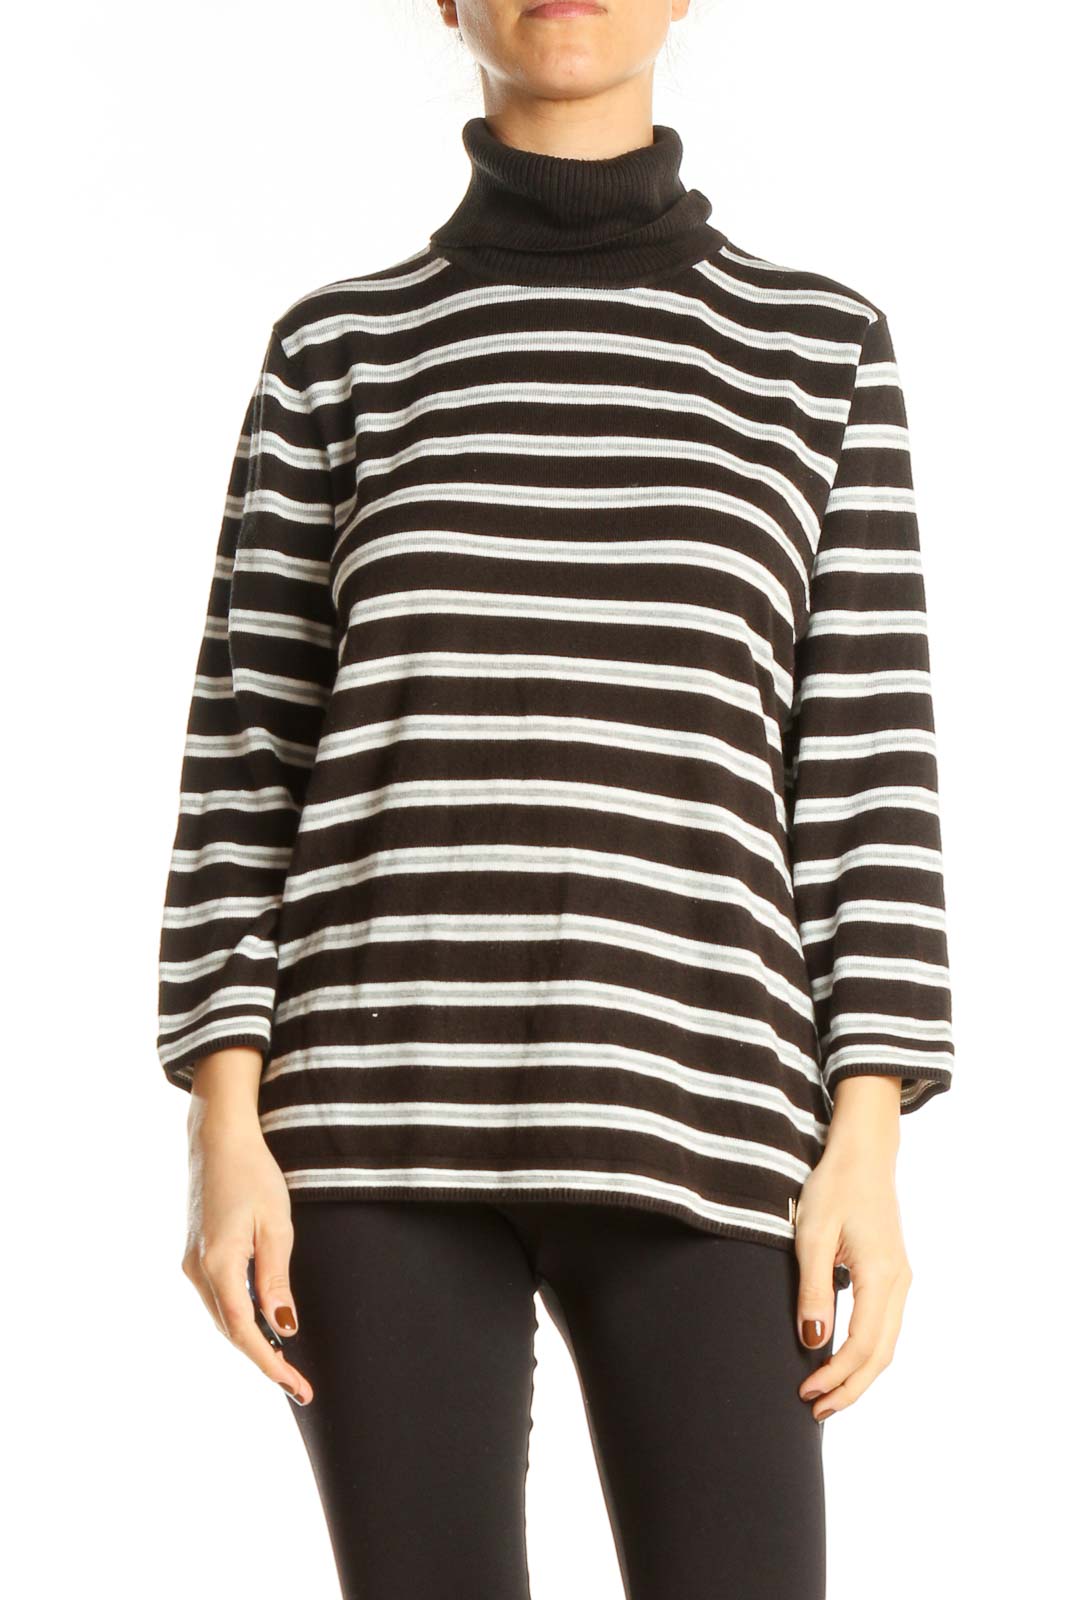 Black White Turtleneck Striped Classic Top Front